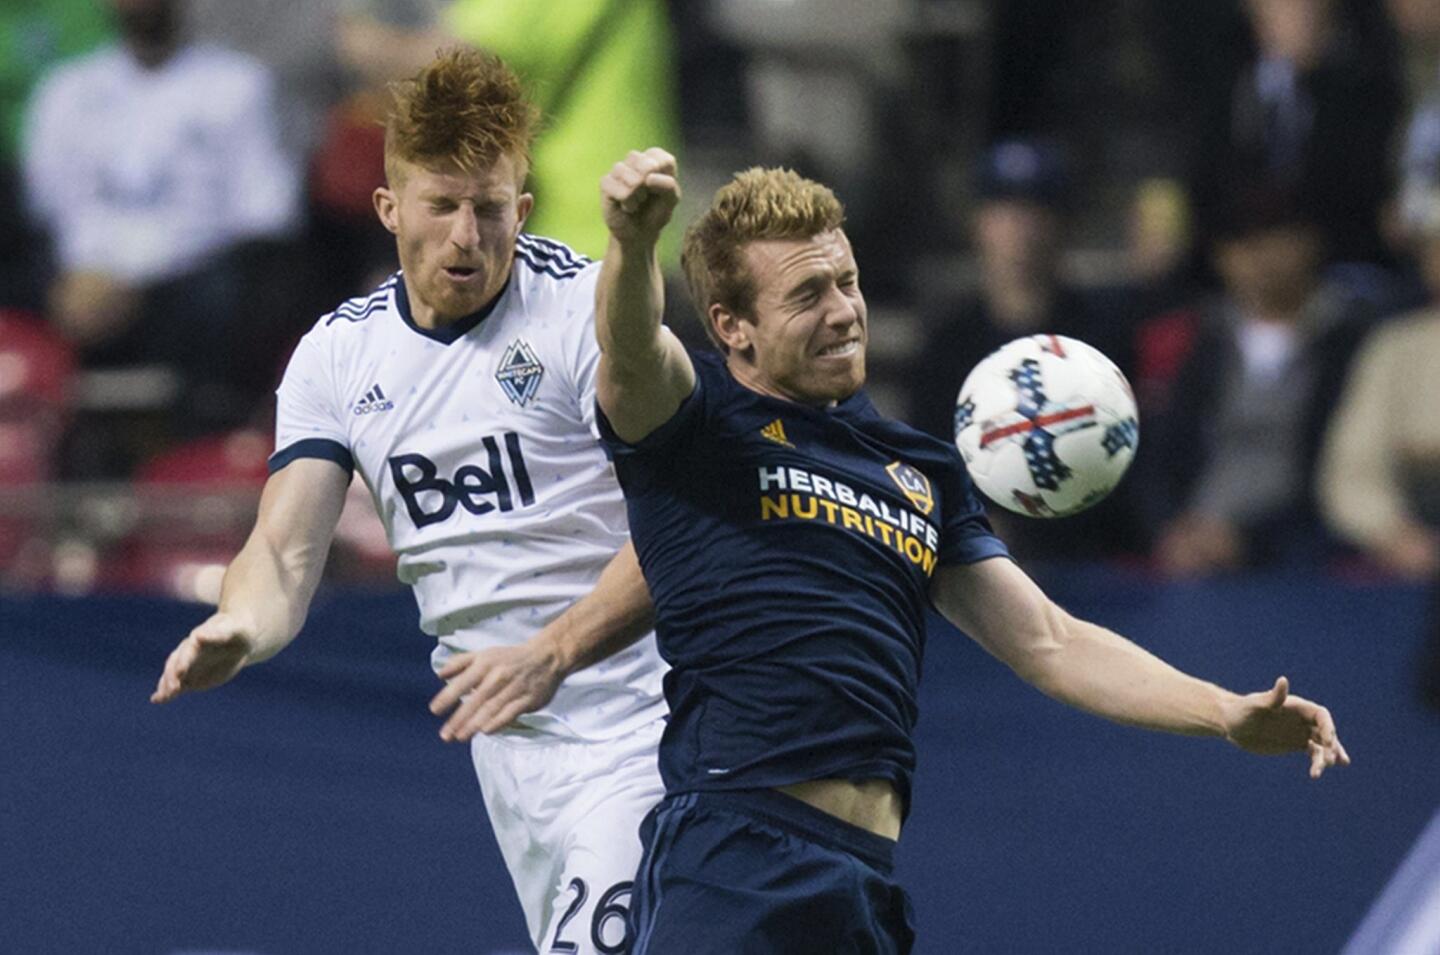 Vancouver Whitecaps' Tim Parker, left, and LA Galaxy's Jack McBean vie for the ball during the first half of an MLS soccer match Saturday, April 1, 2017, in Vancouver, British Columbia. (Darryl Dyck/The Canadian Press via AP)